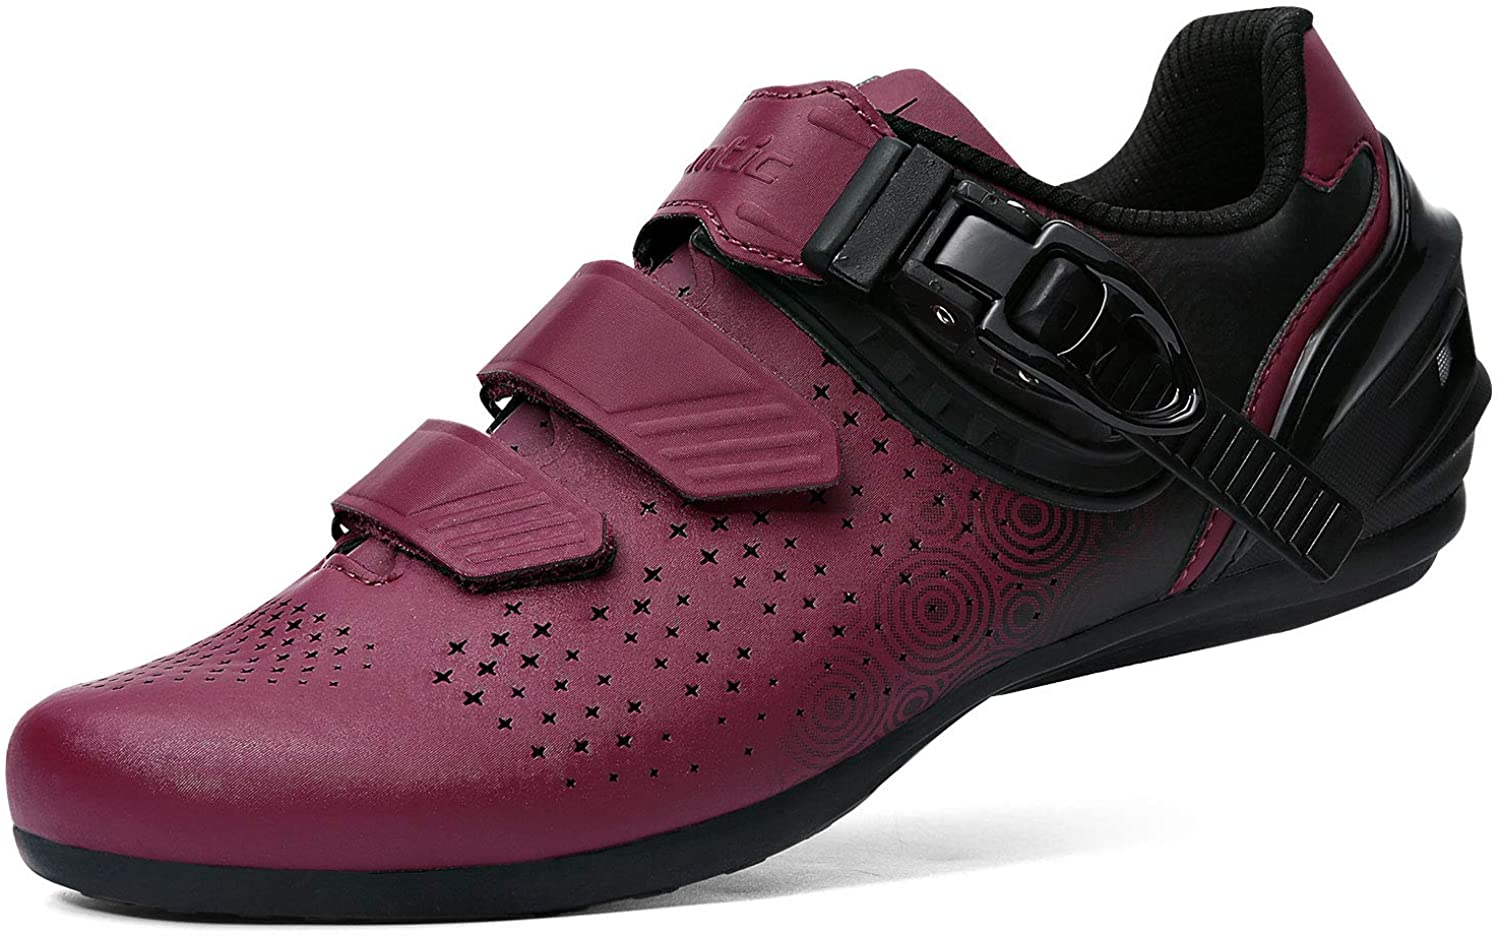 Santic Women Road Bike Cycling Shoes Auto-locking Lace-up Athletic Shoes 